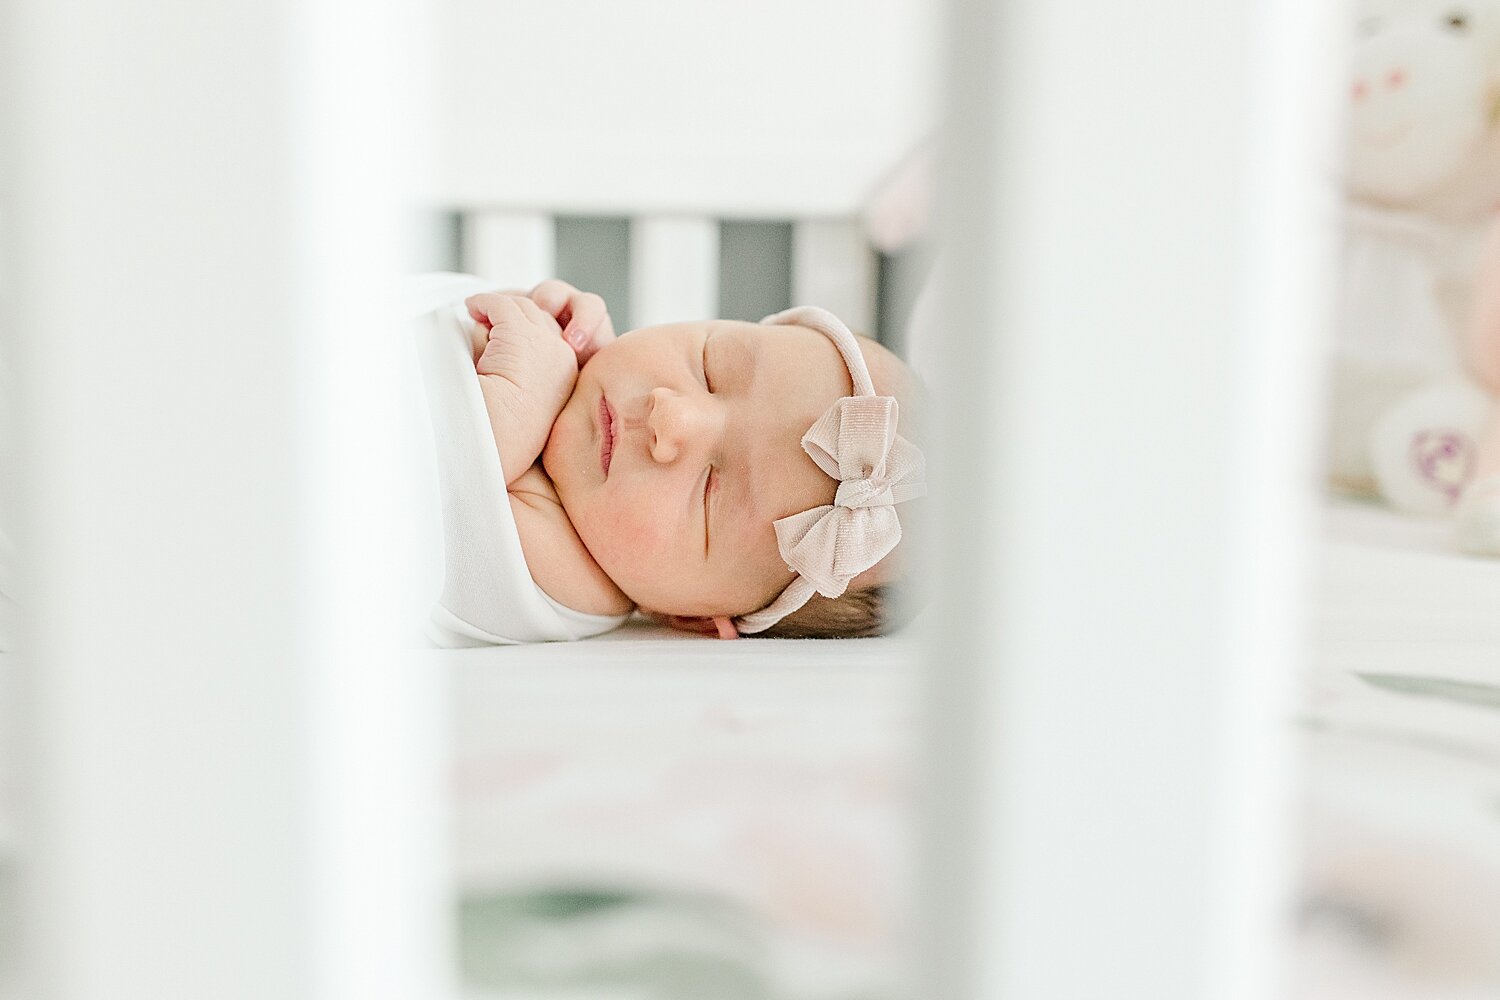 Newborn baby girl laying in crib on floral sheet. Photo by Kristin Wood Photography.